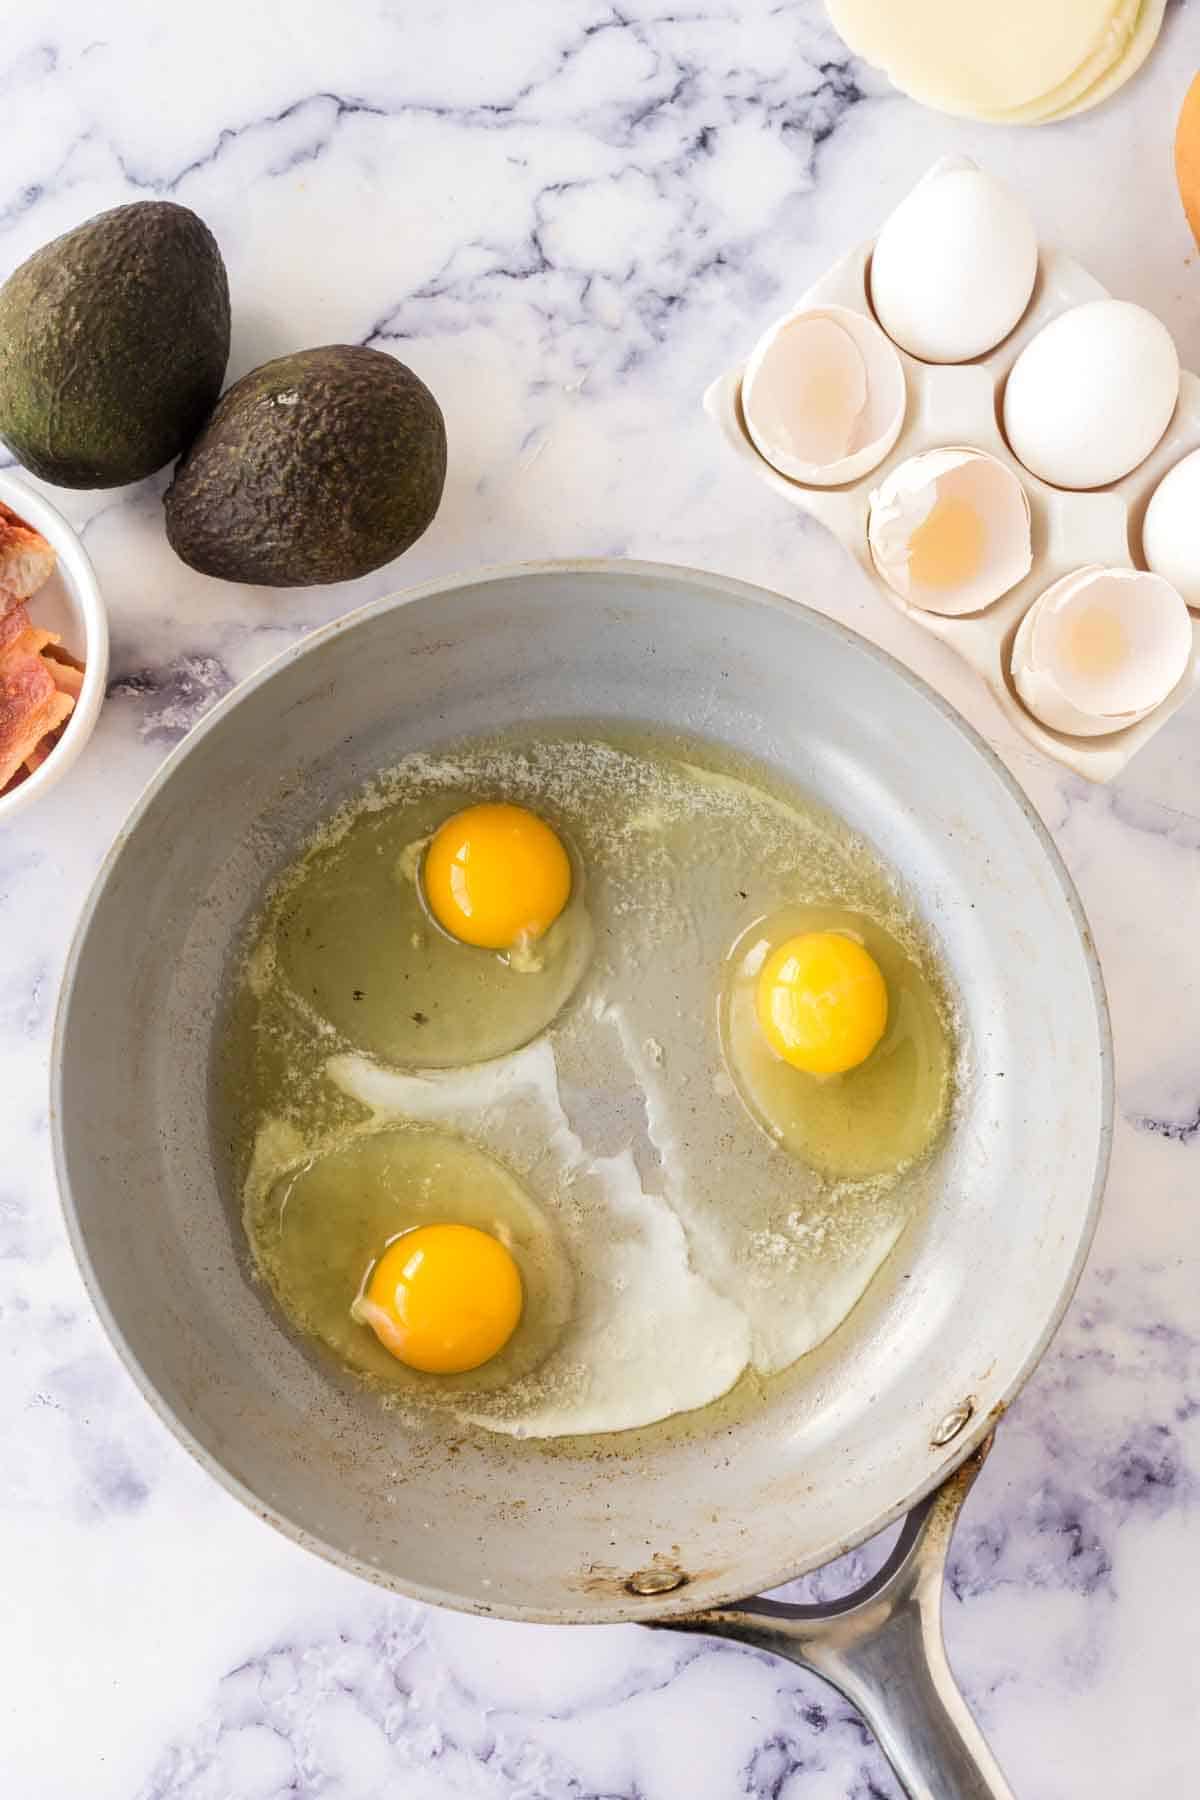 pan with three eggs frying inside